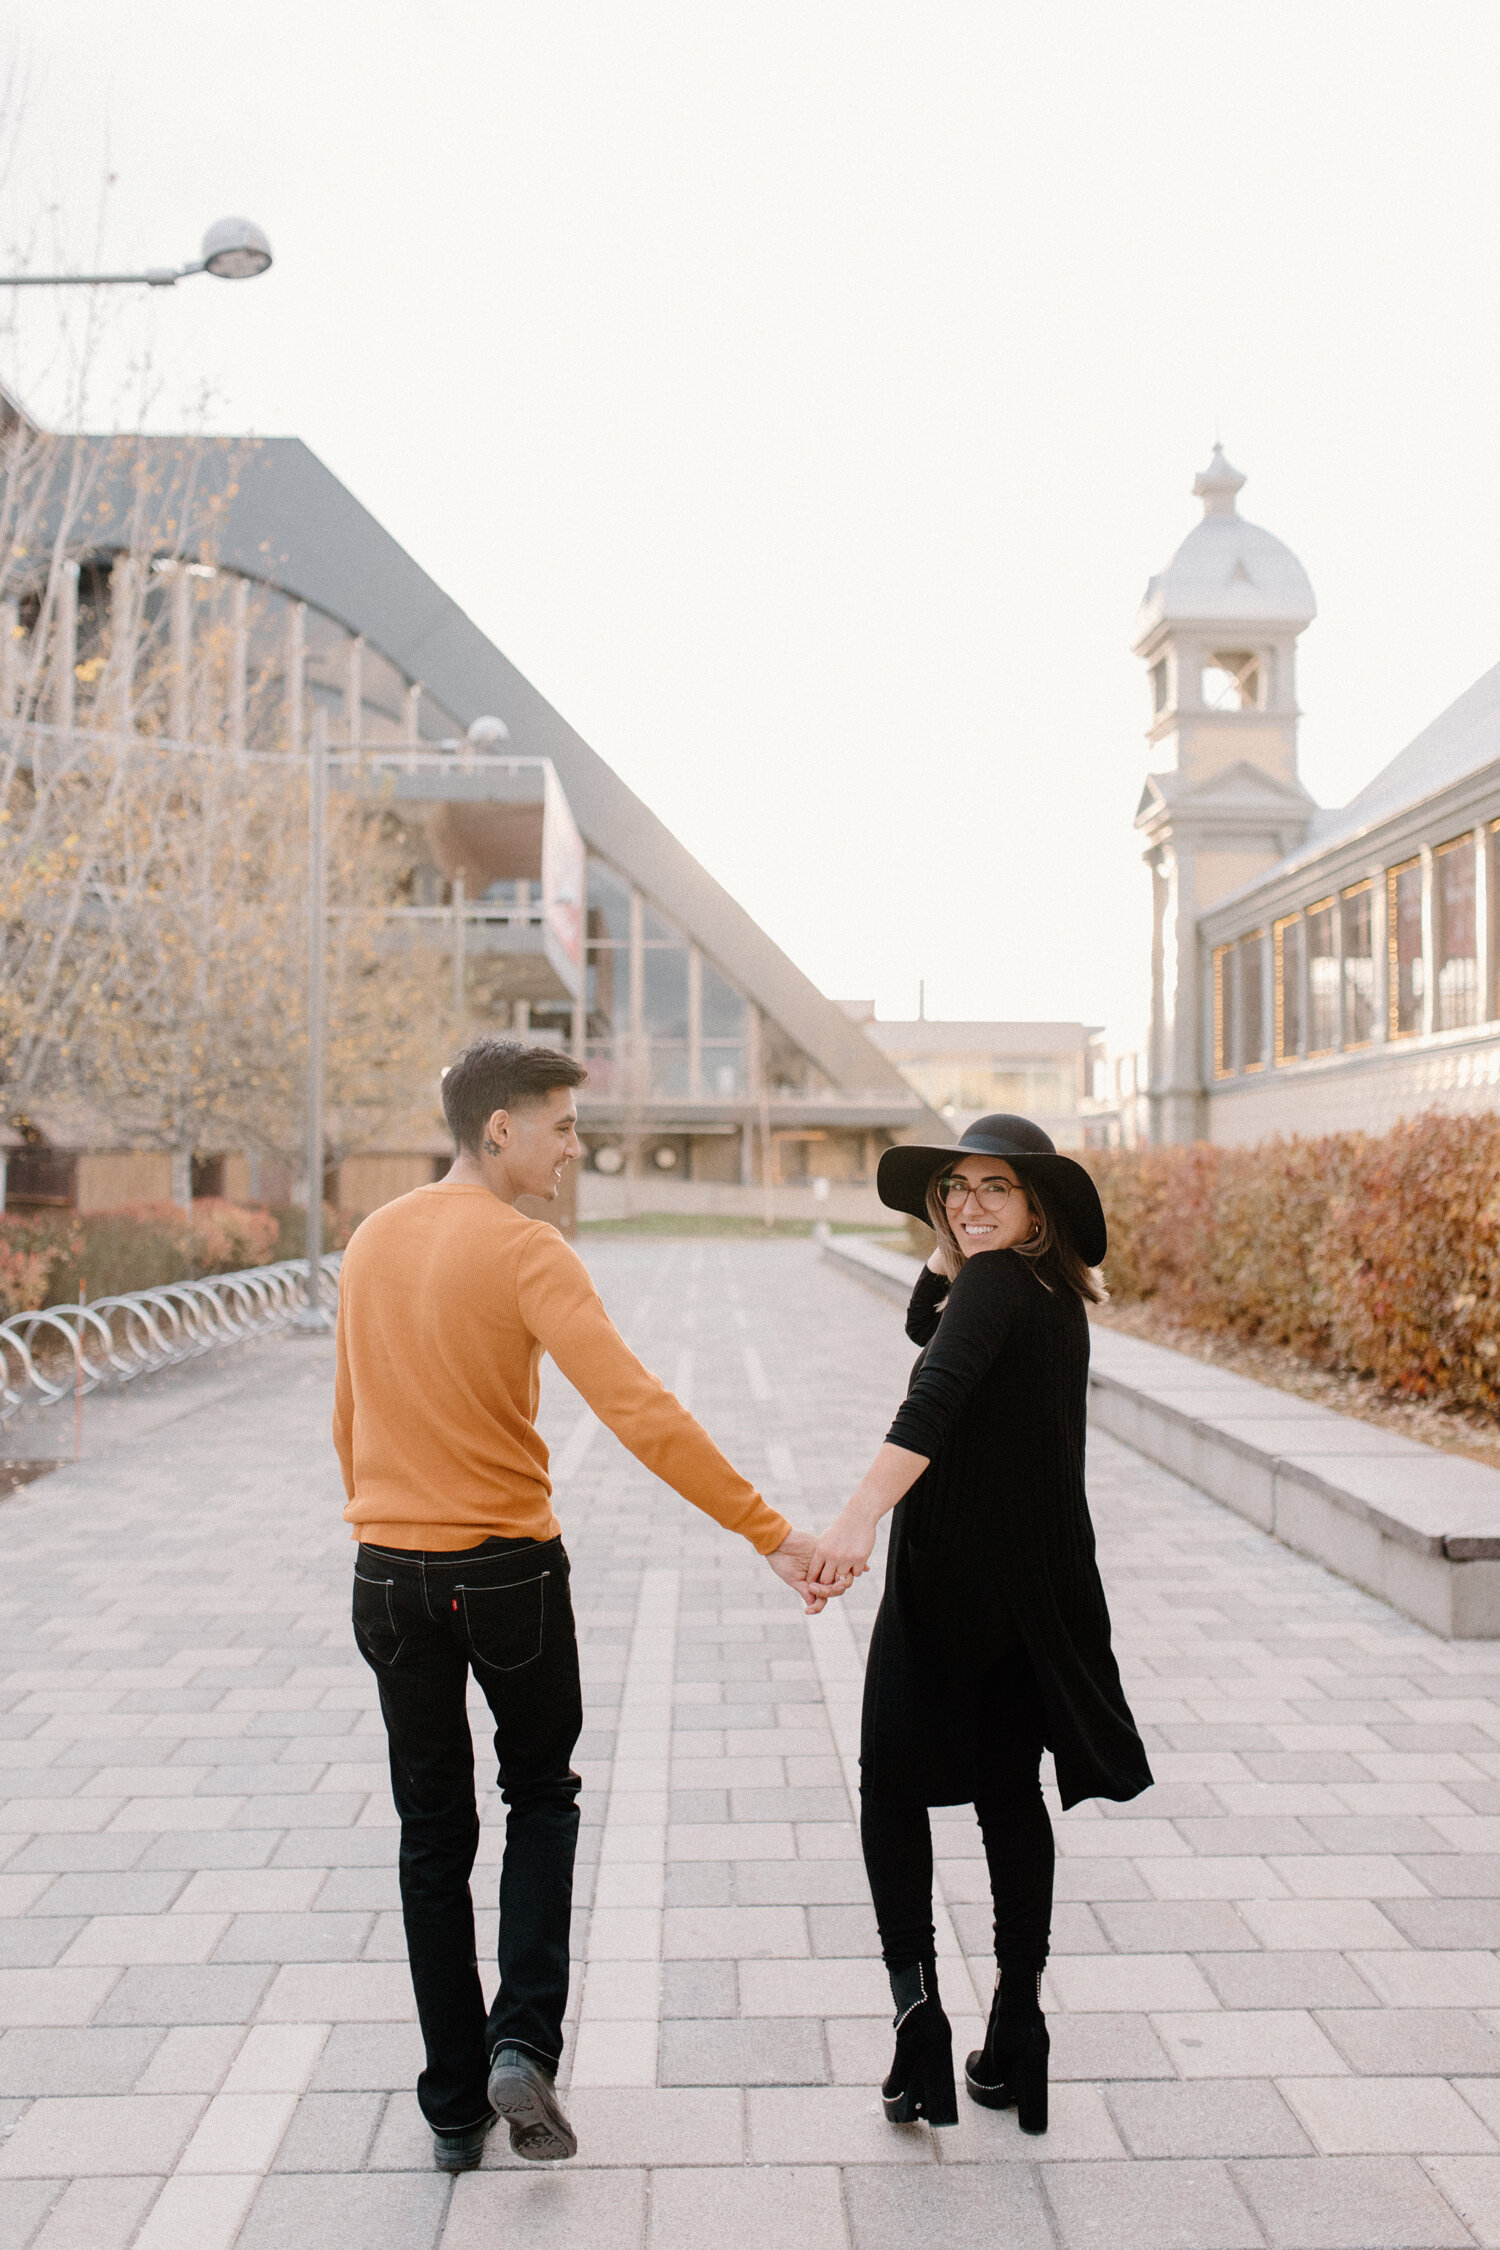  During their urban engagement session, Chelsea Mason photography captures this couple holding hands and smiling outside the Ottawa, Canada Horticulture Building. urban engagement session orange and black engagement outfit colors couple holding hands